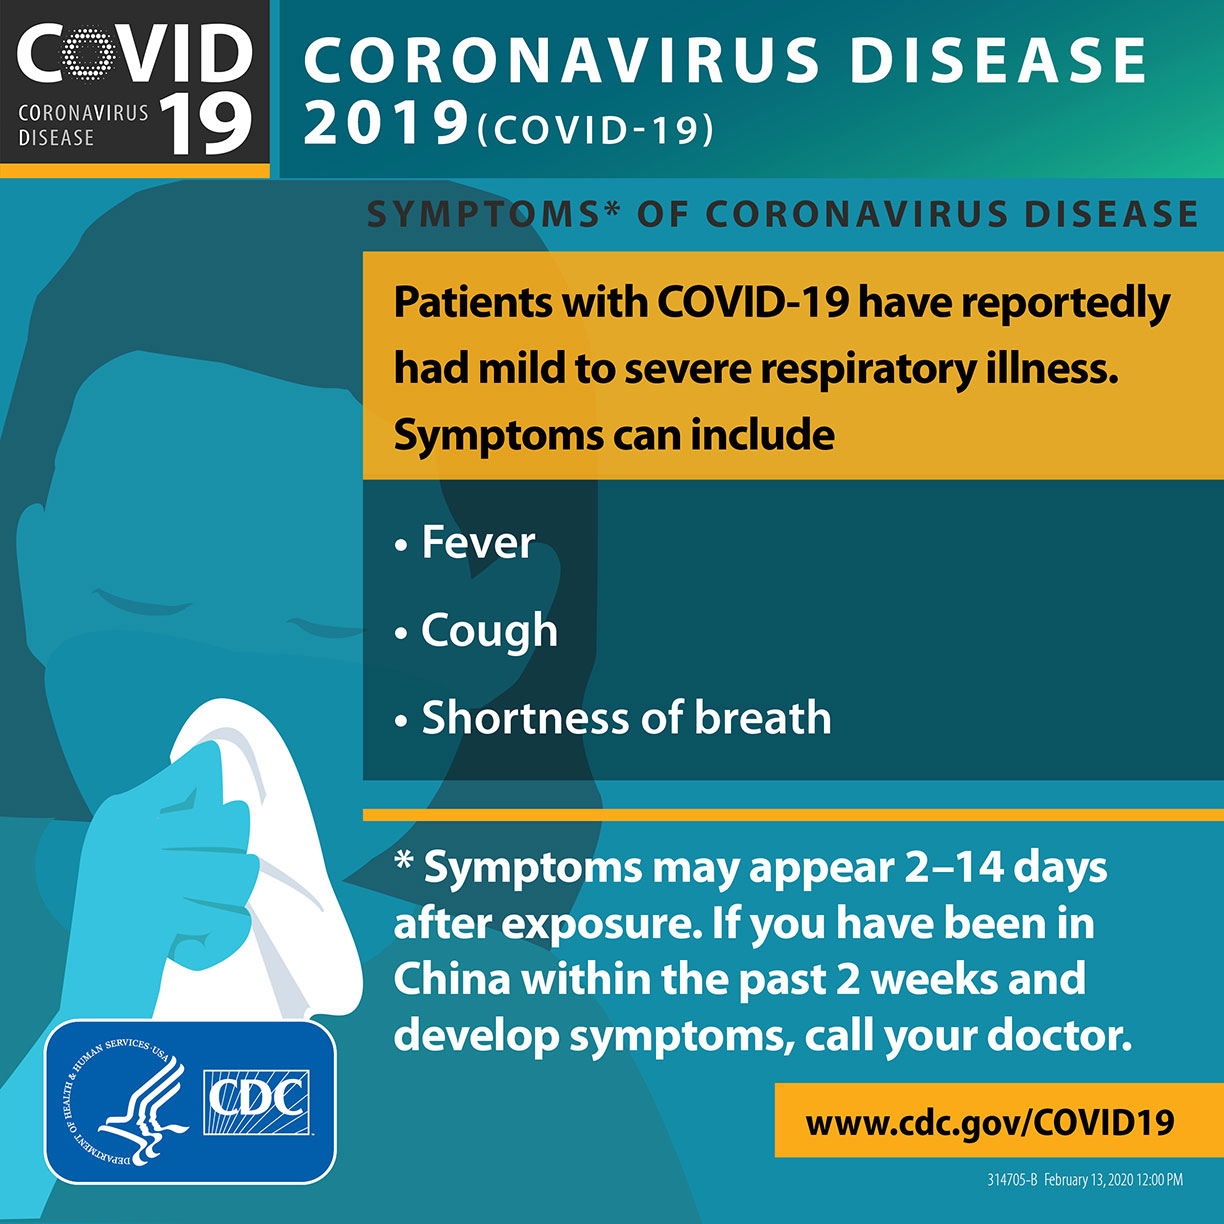 Novel Coronavirus Outbreak (2019-nCoV). Symptoms* of Novel Coronavirus. Patients with 2019-nCoV have reportedly had mild to severe respiratory illness with symptoms of: Fever, Cough, Shortness of breath. *Symptoms may appear 2-14 days after exposure. If you have been in China within the past 2 weeks and develop symptoms, call your doctor. CDC logo. www.cdc.gov/nCoV